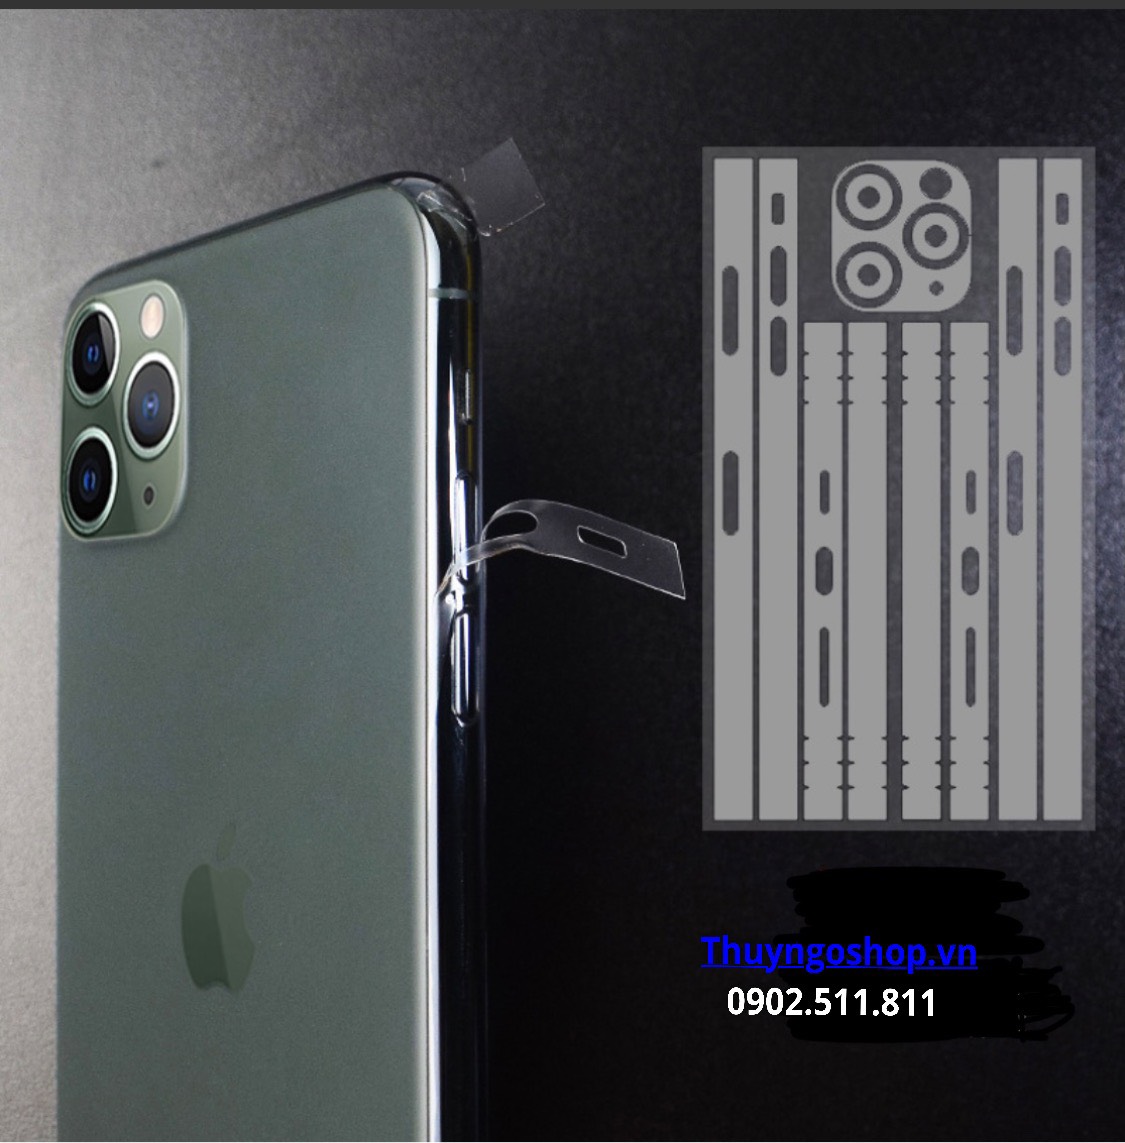 PPF 4 cạnh viền trong suốt / mờ Iphone 11 Pro